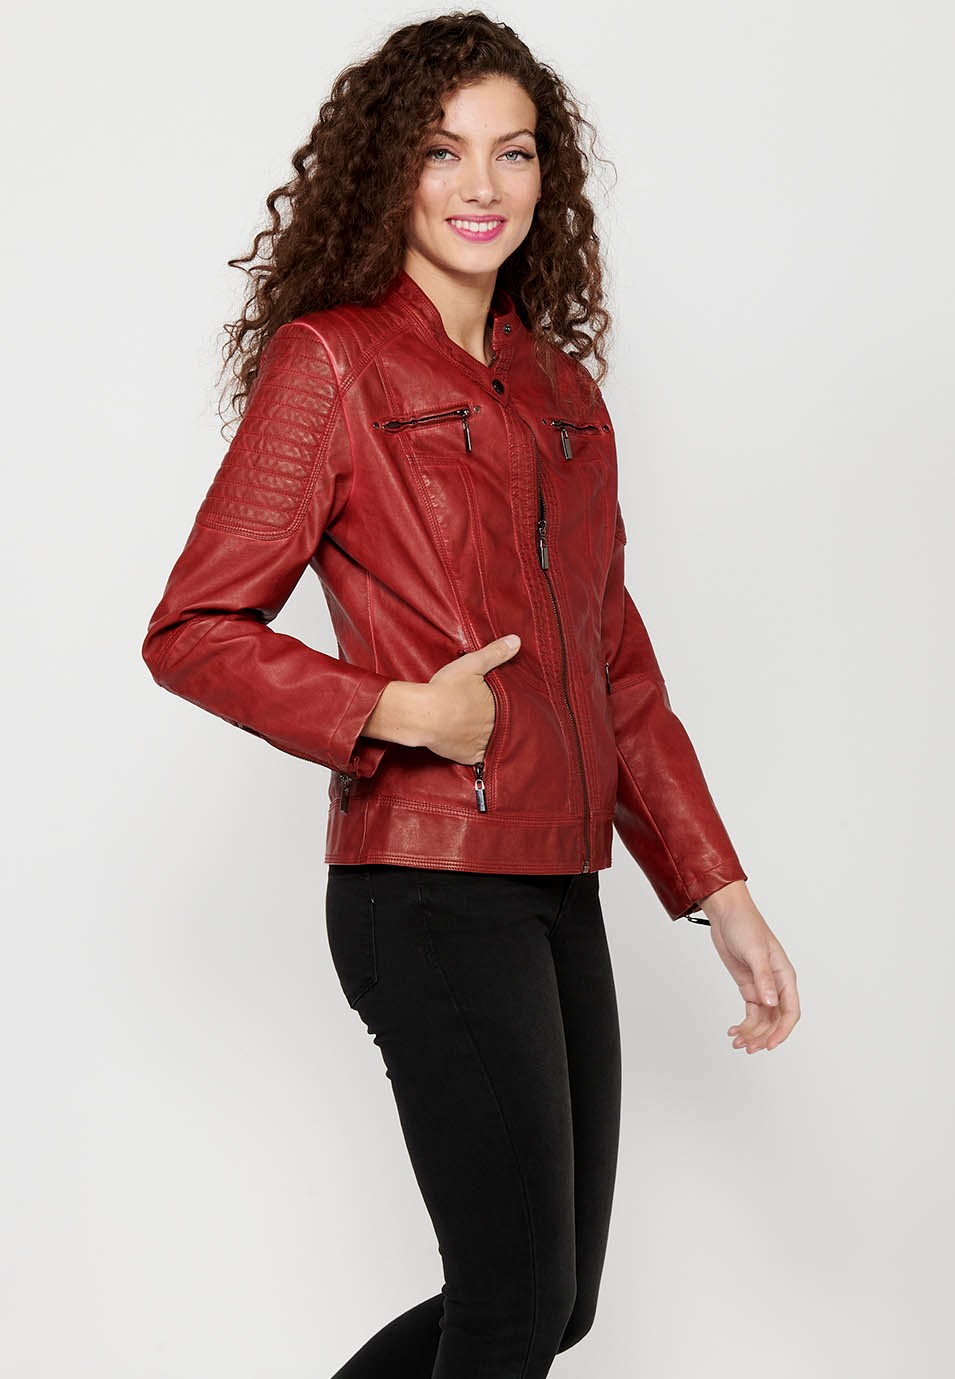 Women's Red Long Sleeve Round Neck Zipper Front Closure Jacket 2